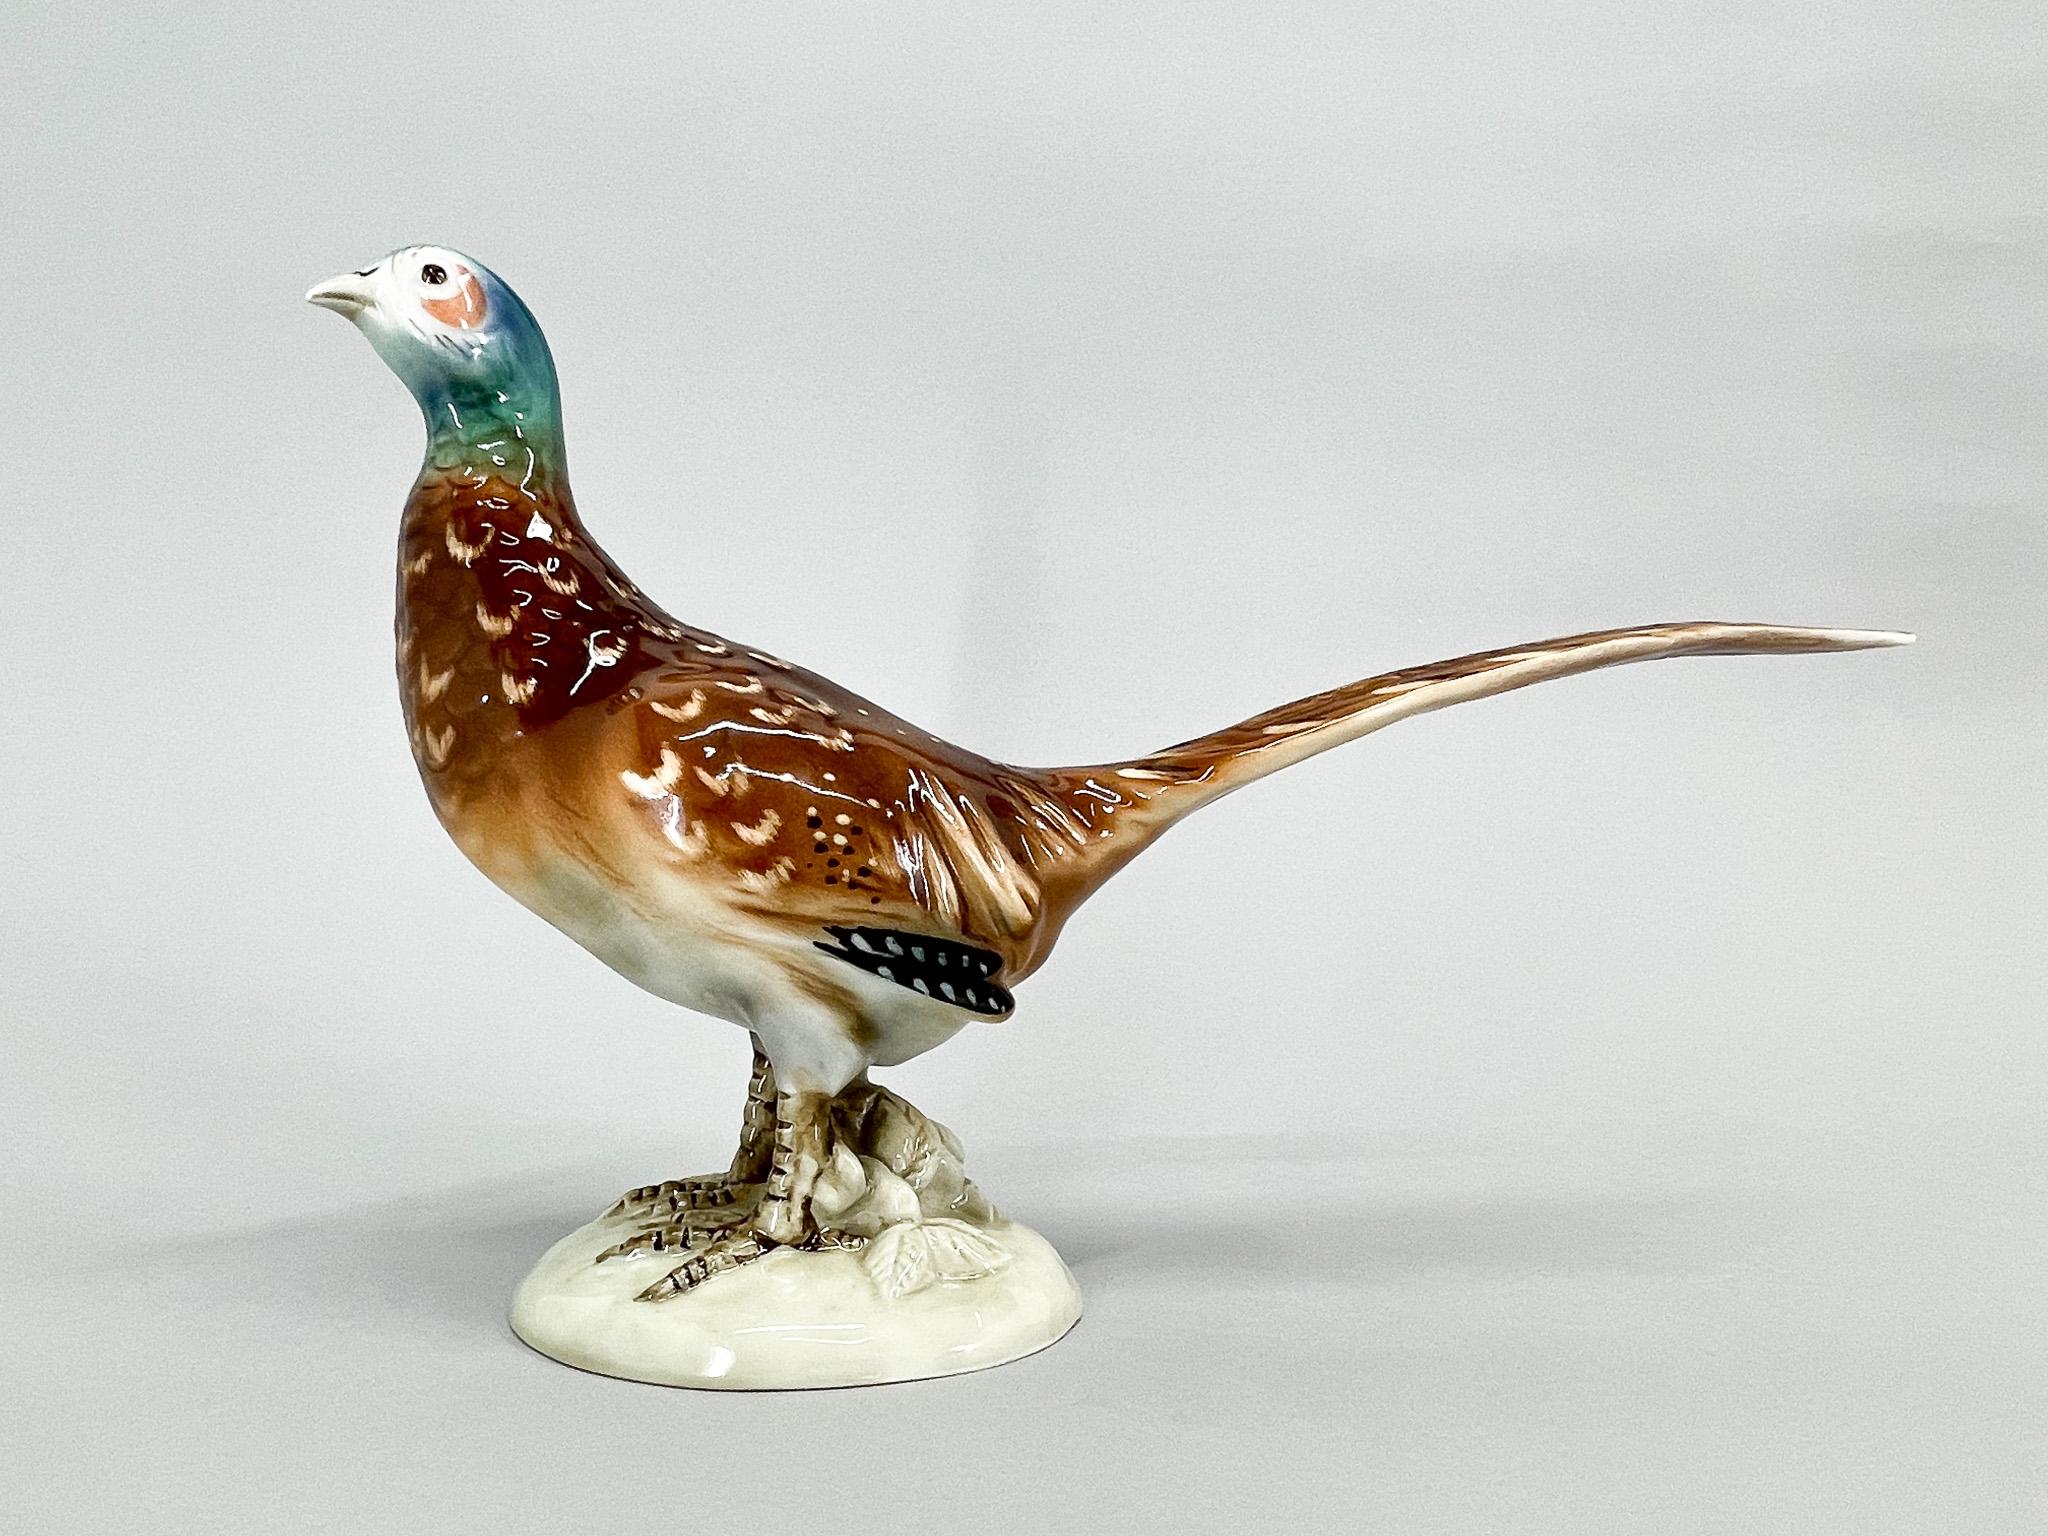 Mid-century porcelain sculpture of a pheasant, produced by the famous Royal Dux in the 1960's.